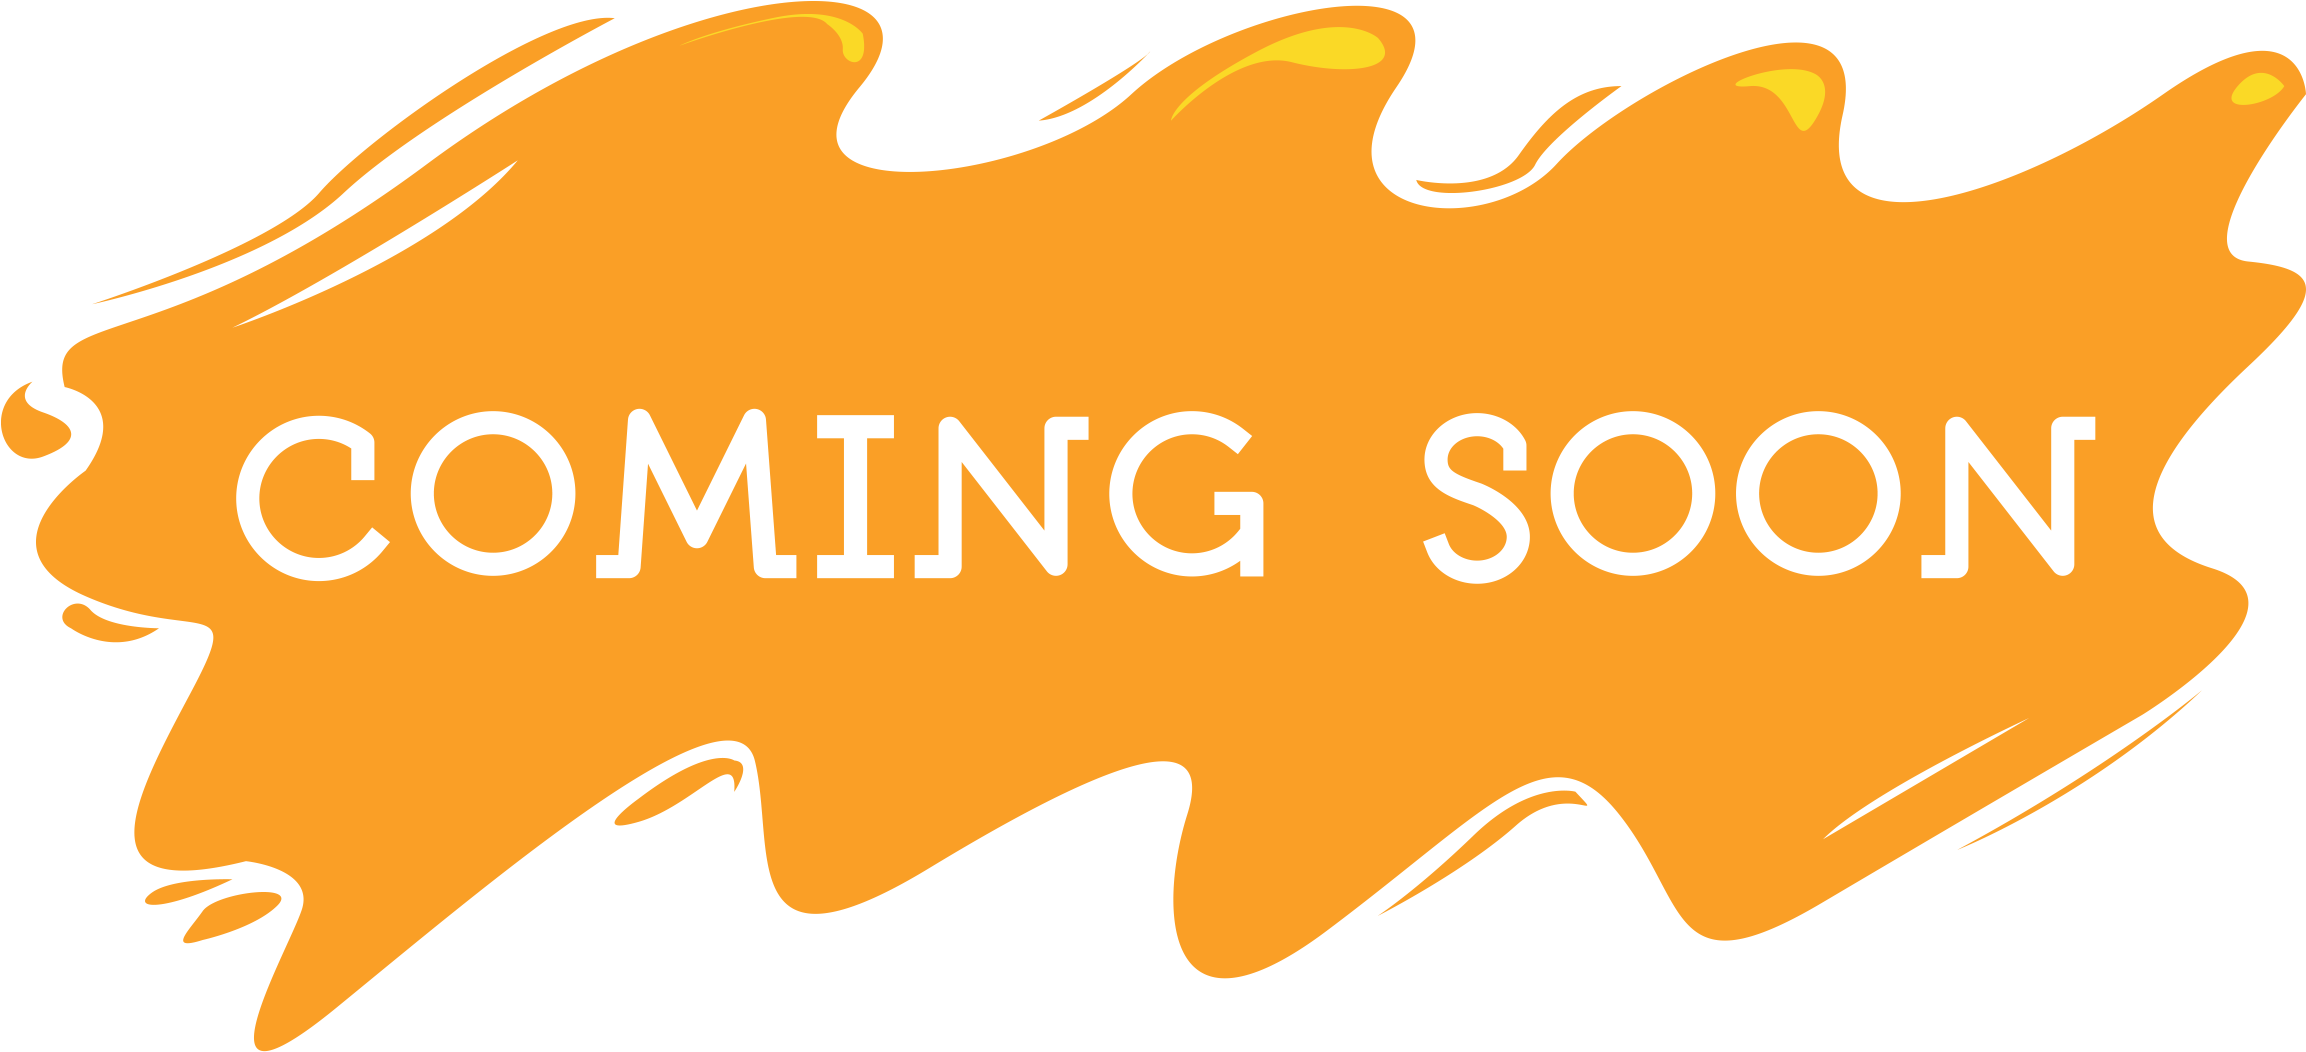 Coming Soon Hd Png - Clip Art Library